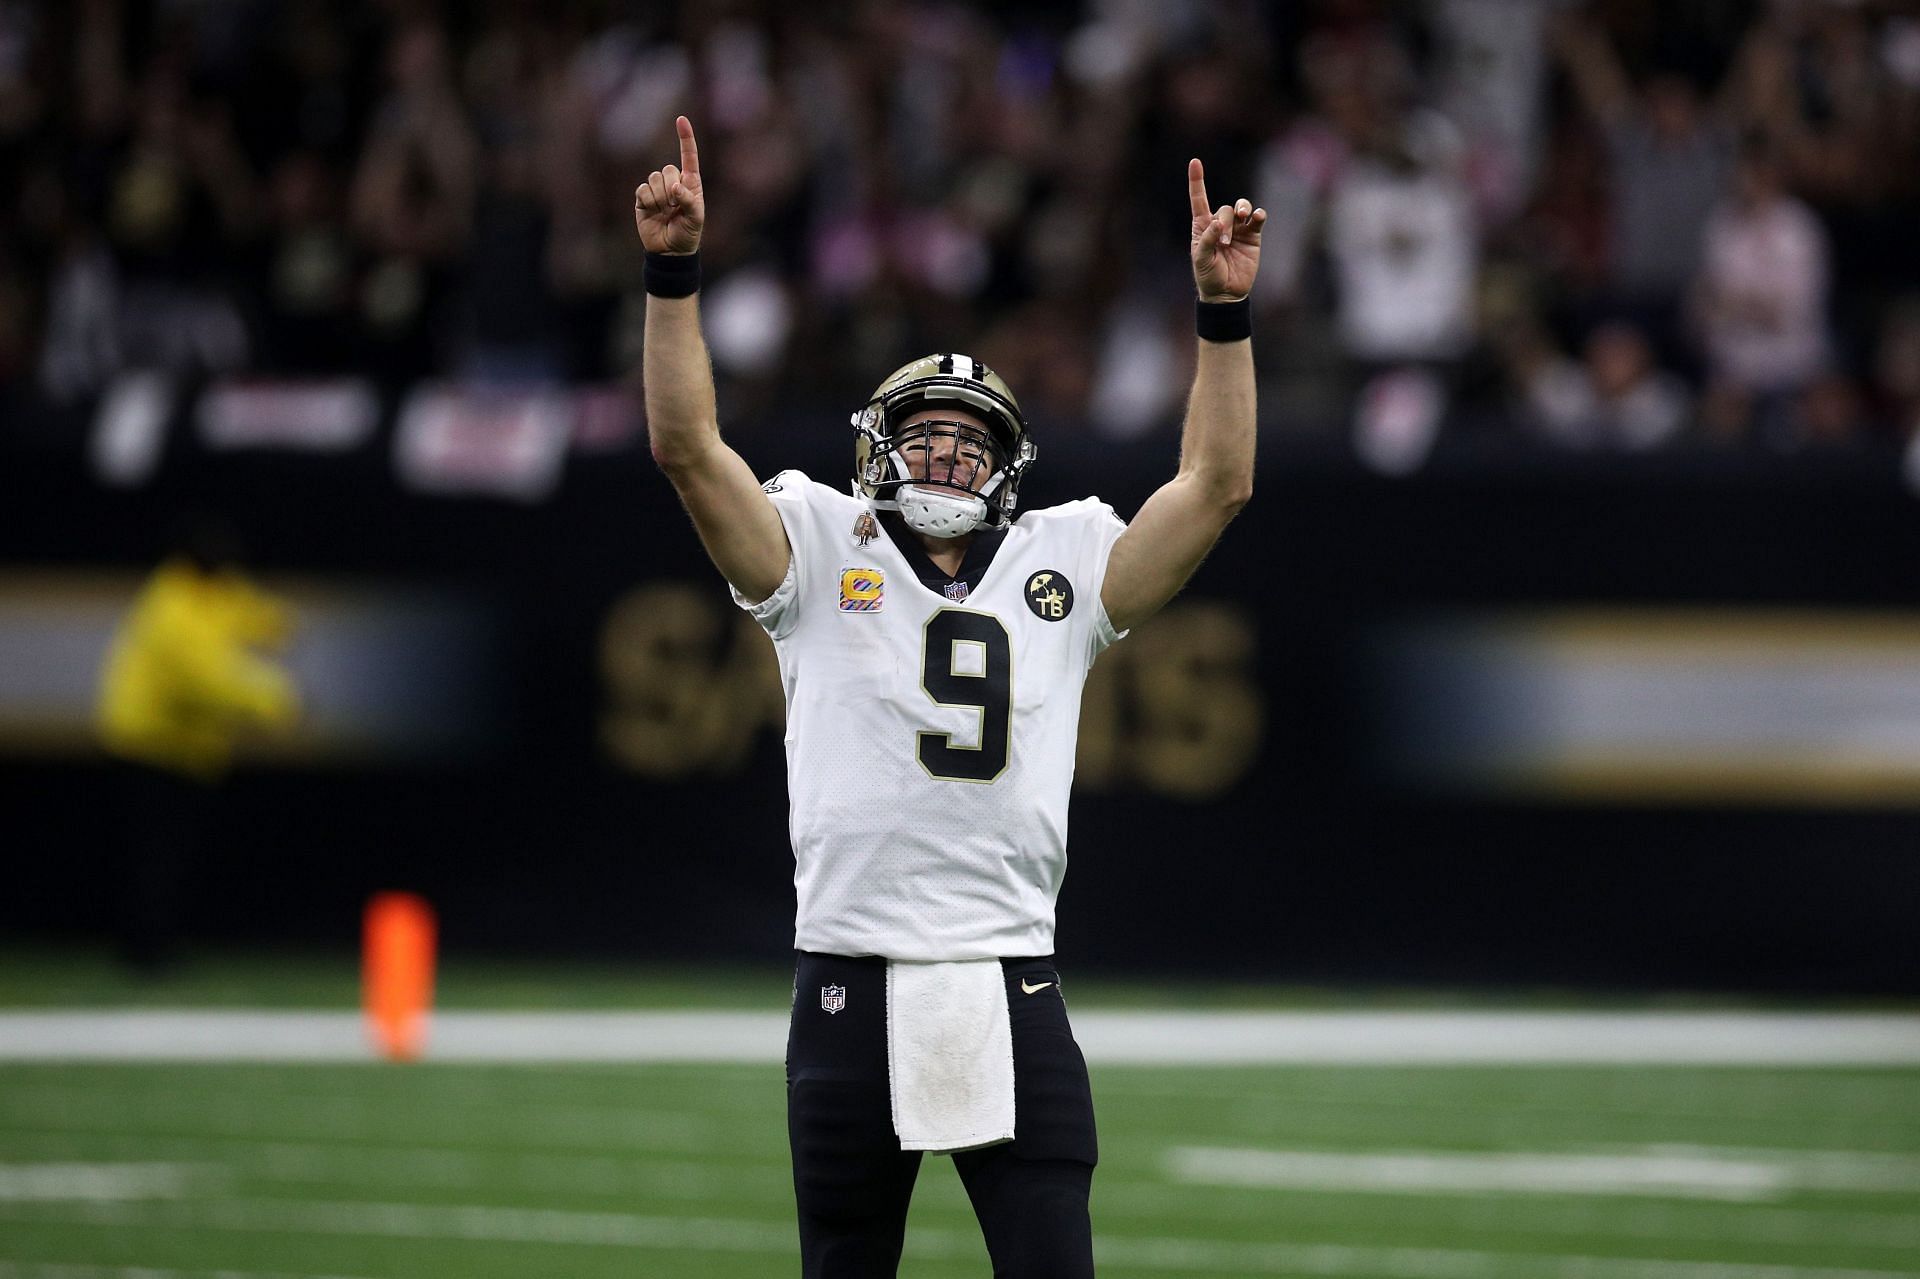 Purdue football makes huge NIL move with Drew Brees